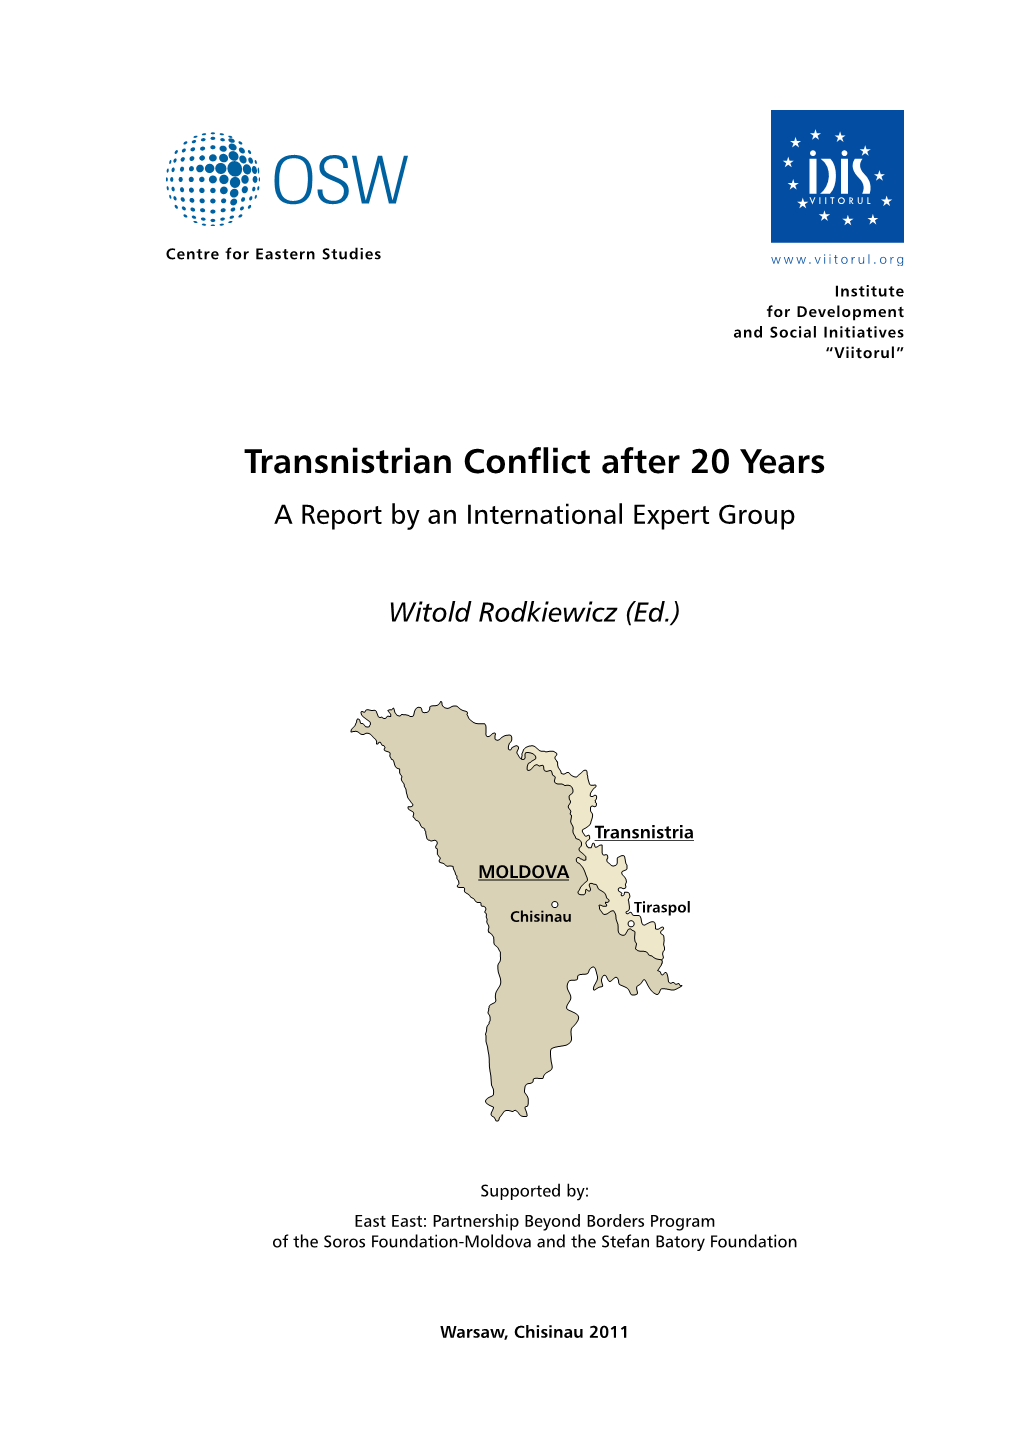 Transnistrian Conflict After 20 Years a Report by an International Expert Group